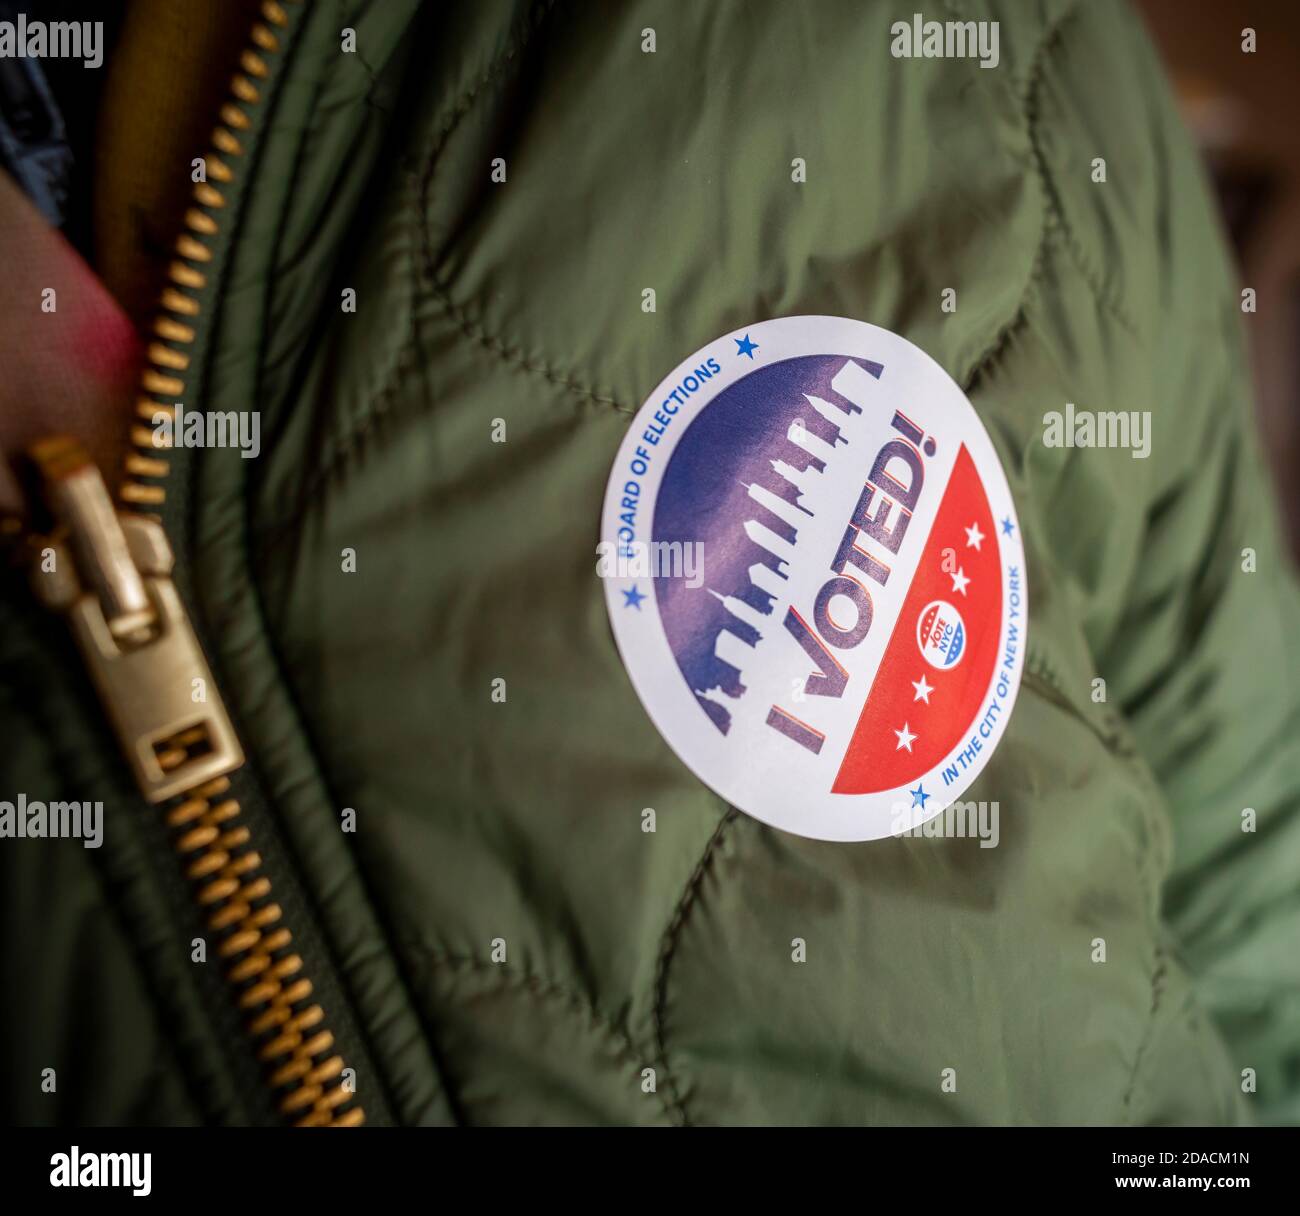 A voter wears her 'I Voted' sticker on Election Day in New York on Tuesday, November 3, 2020. (© Richard B. Levine) Stock Photo